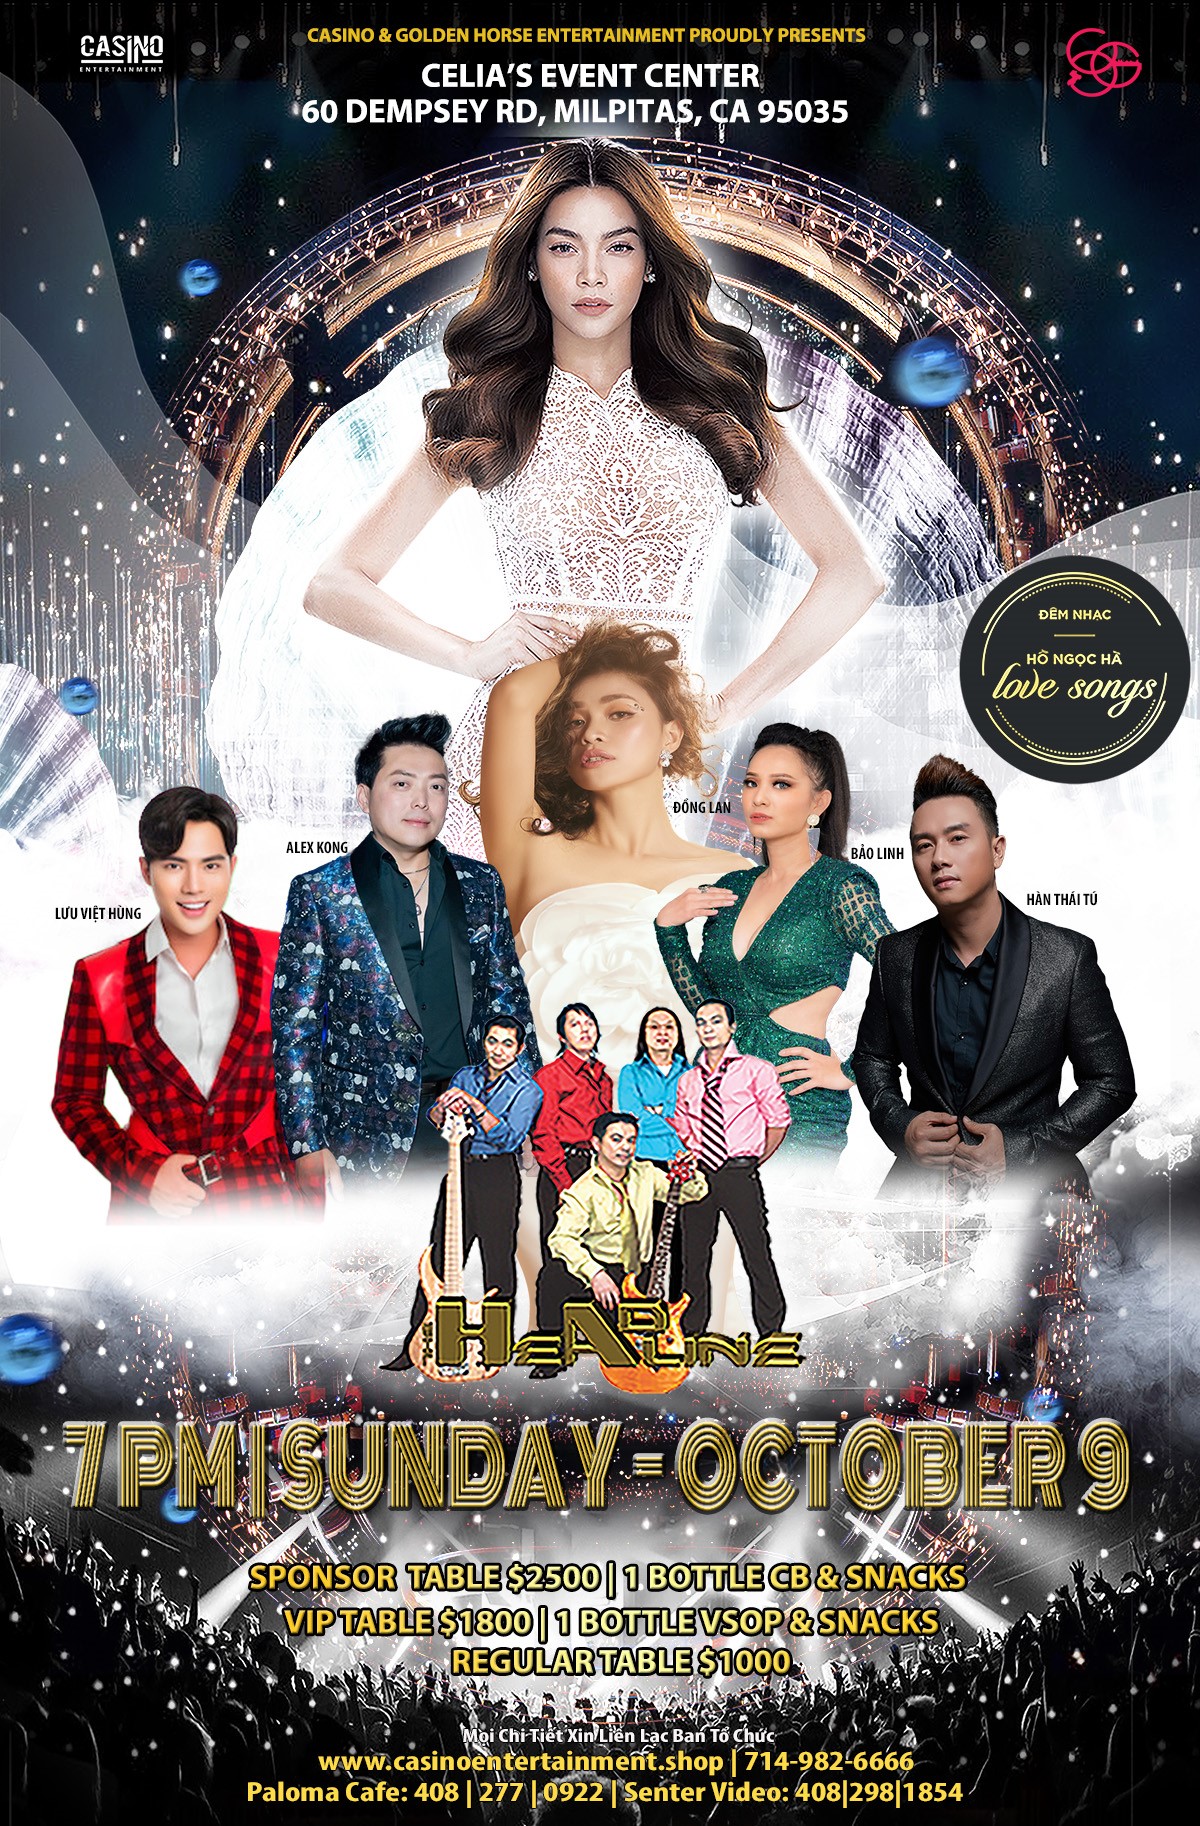 Hồ Ngọc Hà | Love Songs Celia's Event Center on Oct 09, 19:00@San Jose Celias Event Center - Pick a seat, Buy tickets and Get information on www.casinoentertainment.shop casinoentertainment